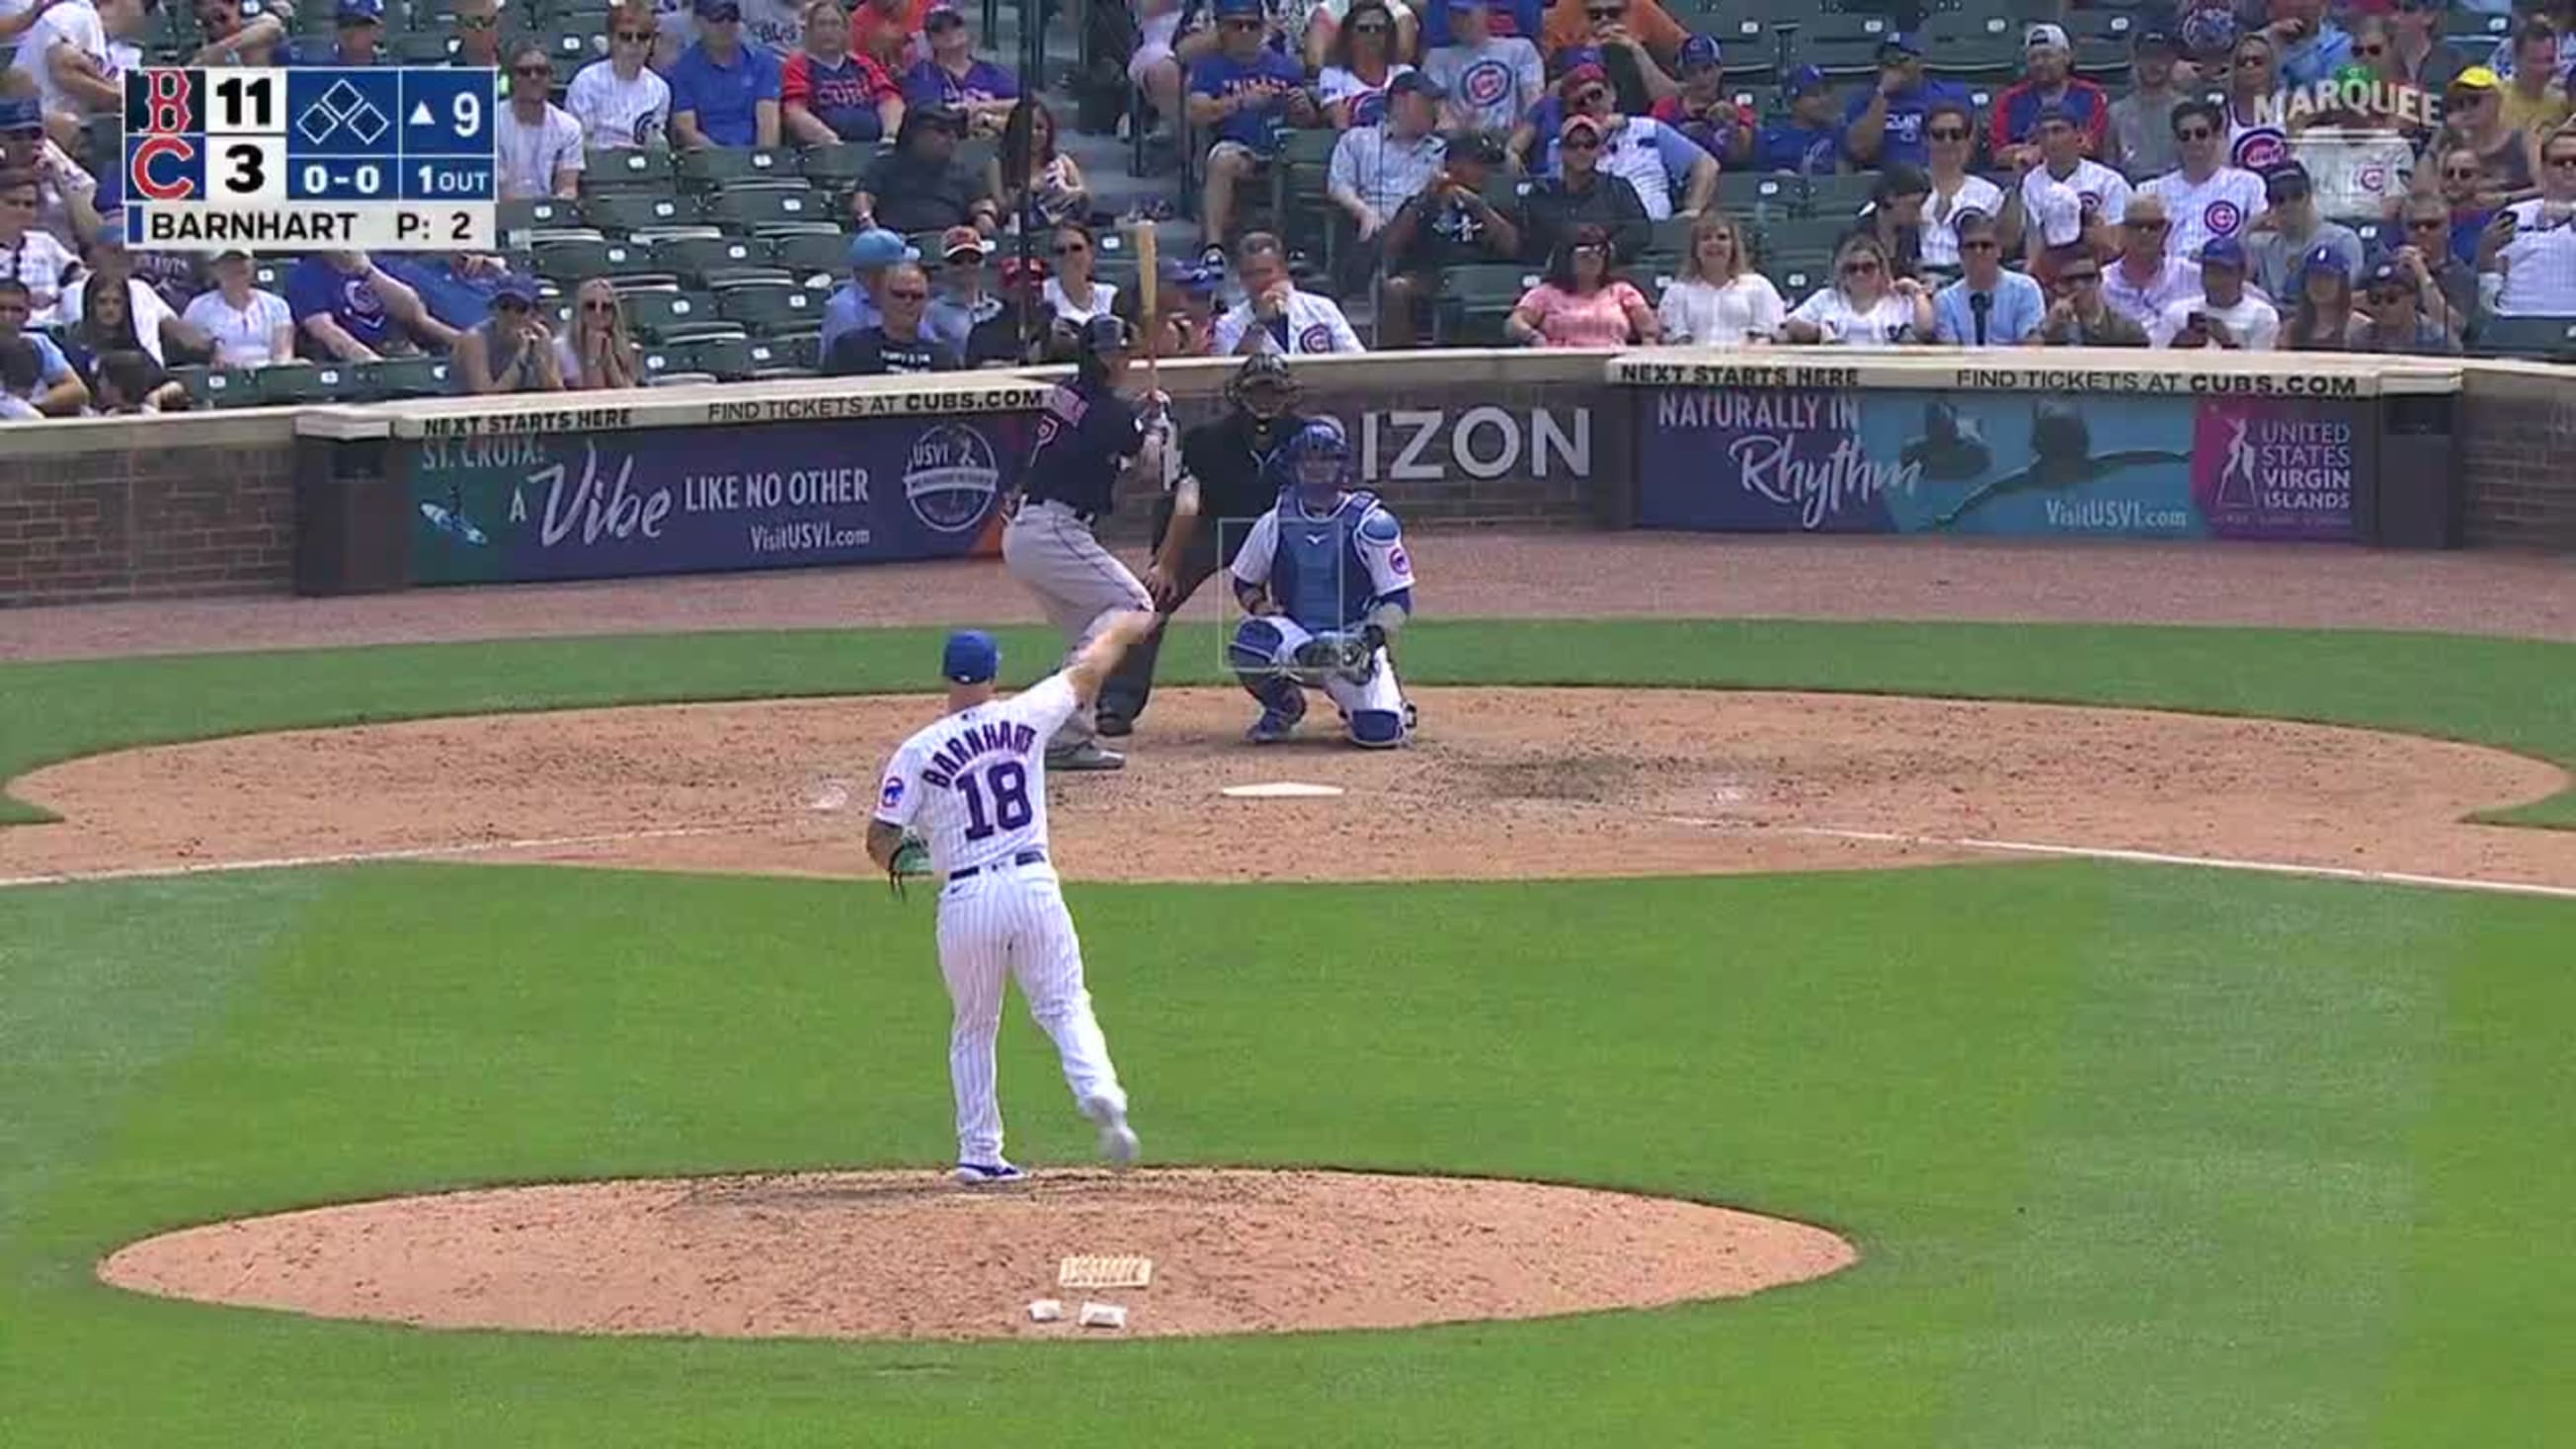 Tucker Barnhart efficient outing against the Braves (6 pitches